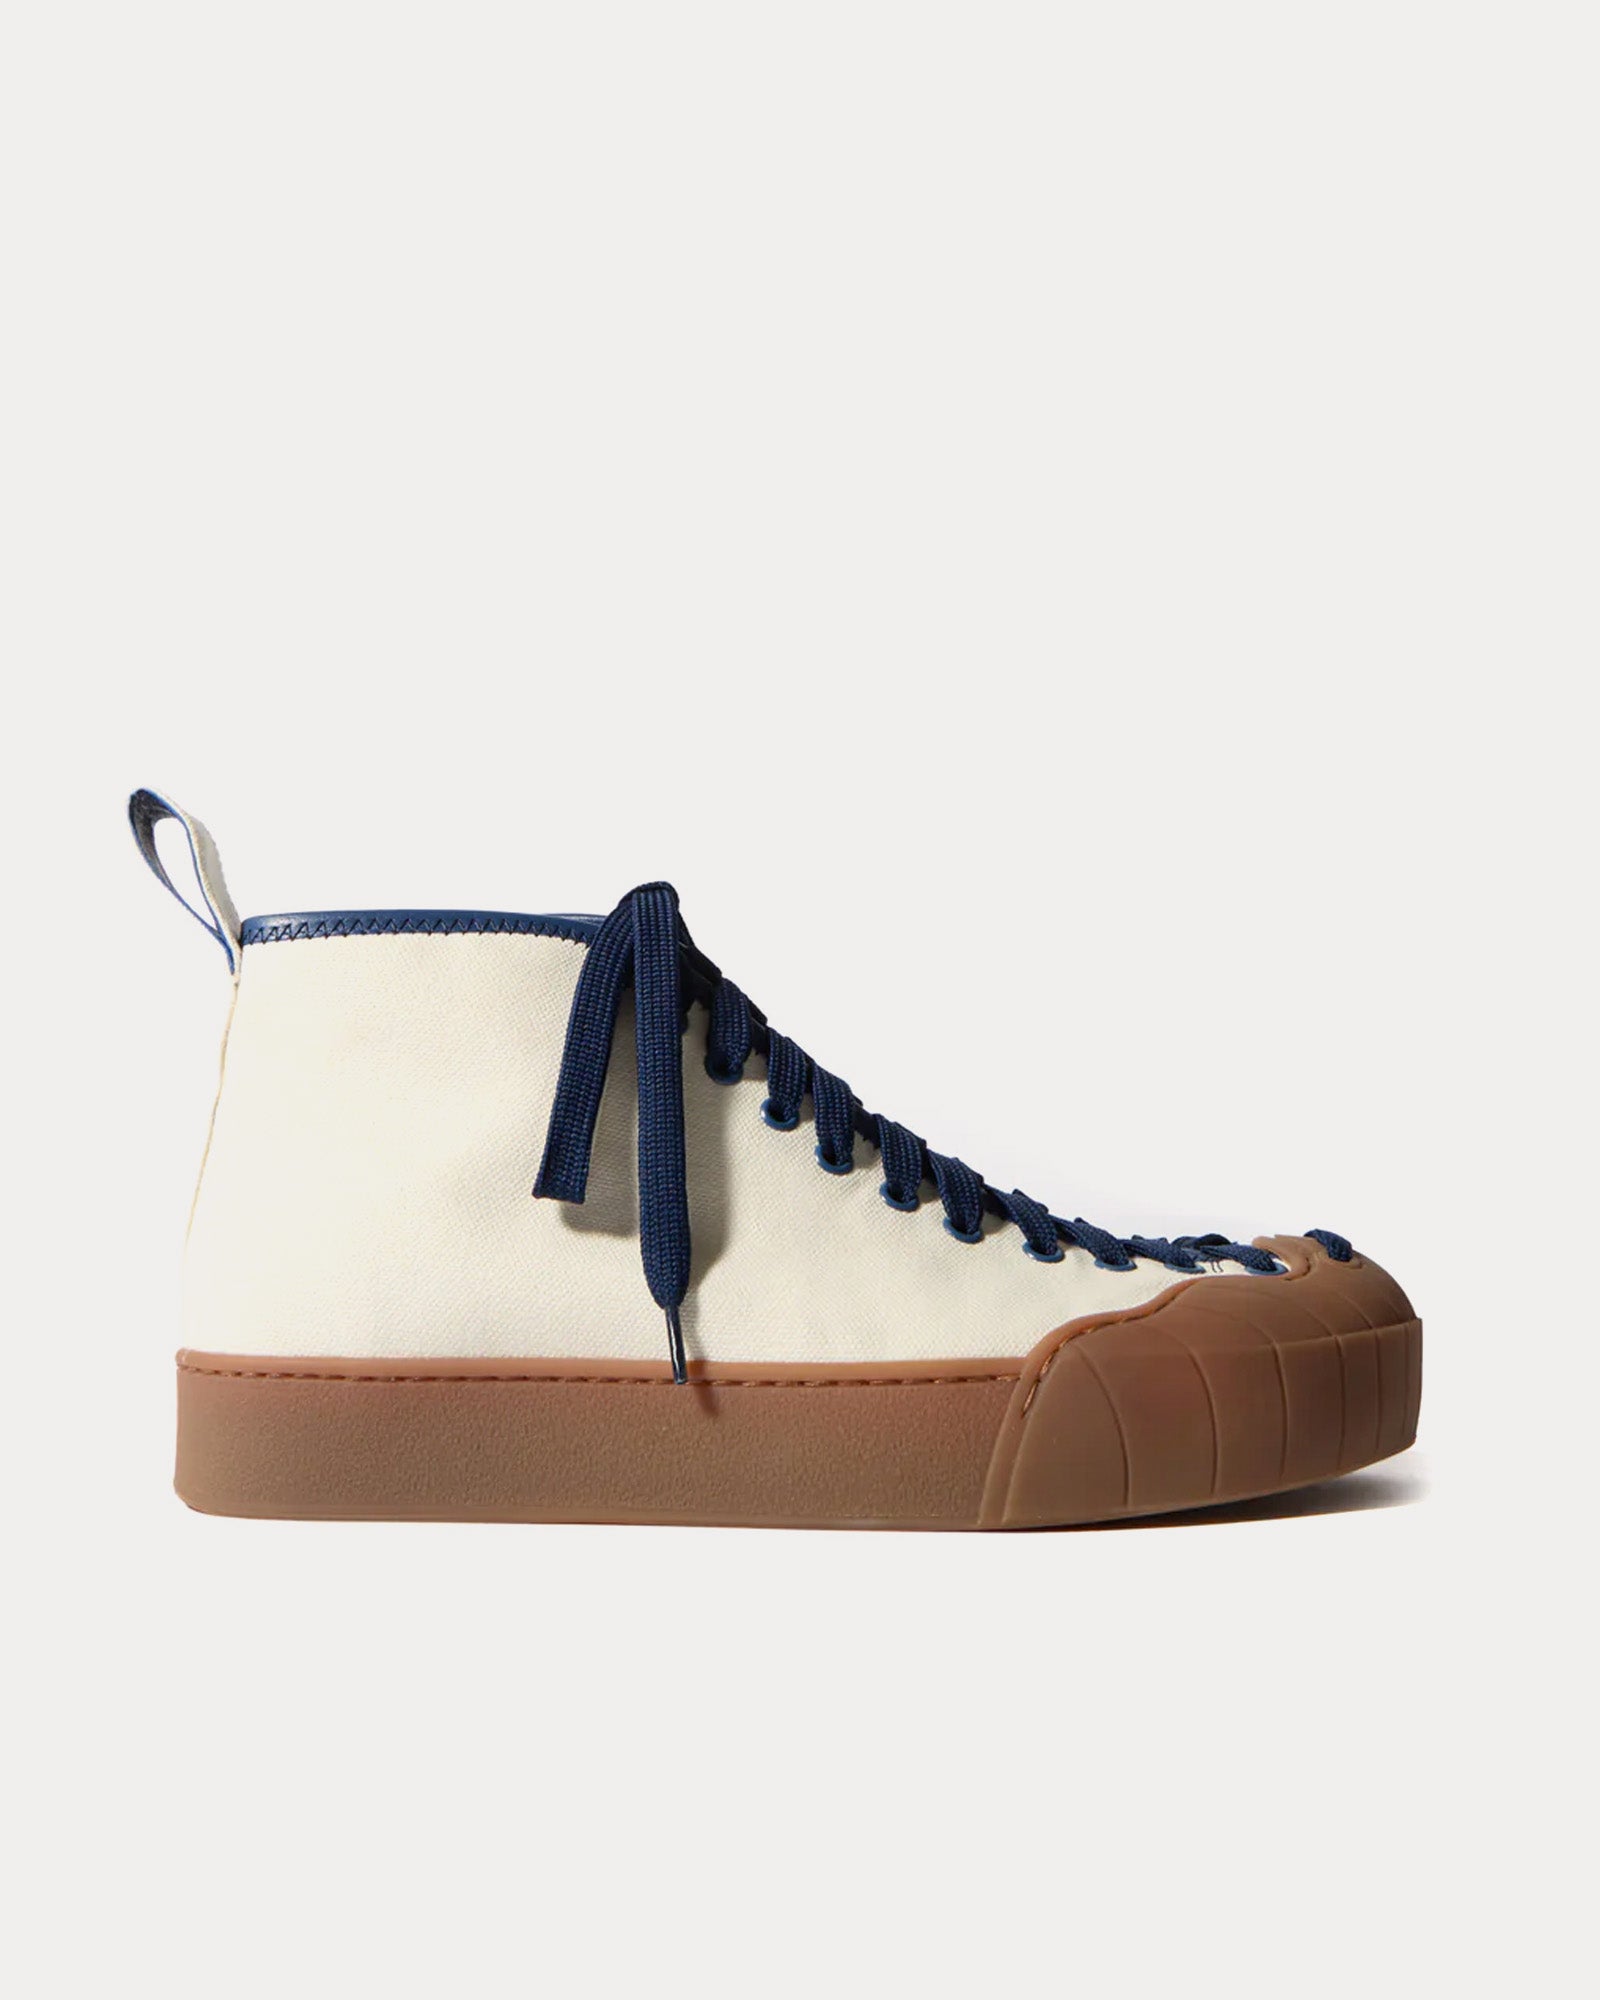 Sunnei - Isi White / Bluette High Top Sneakers